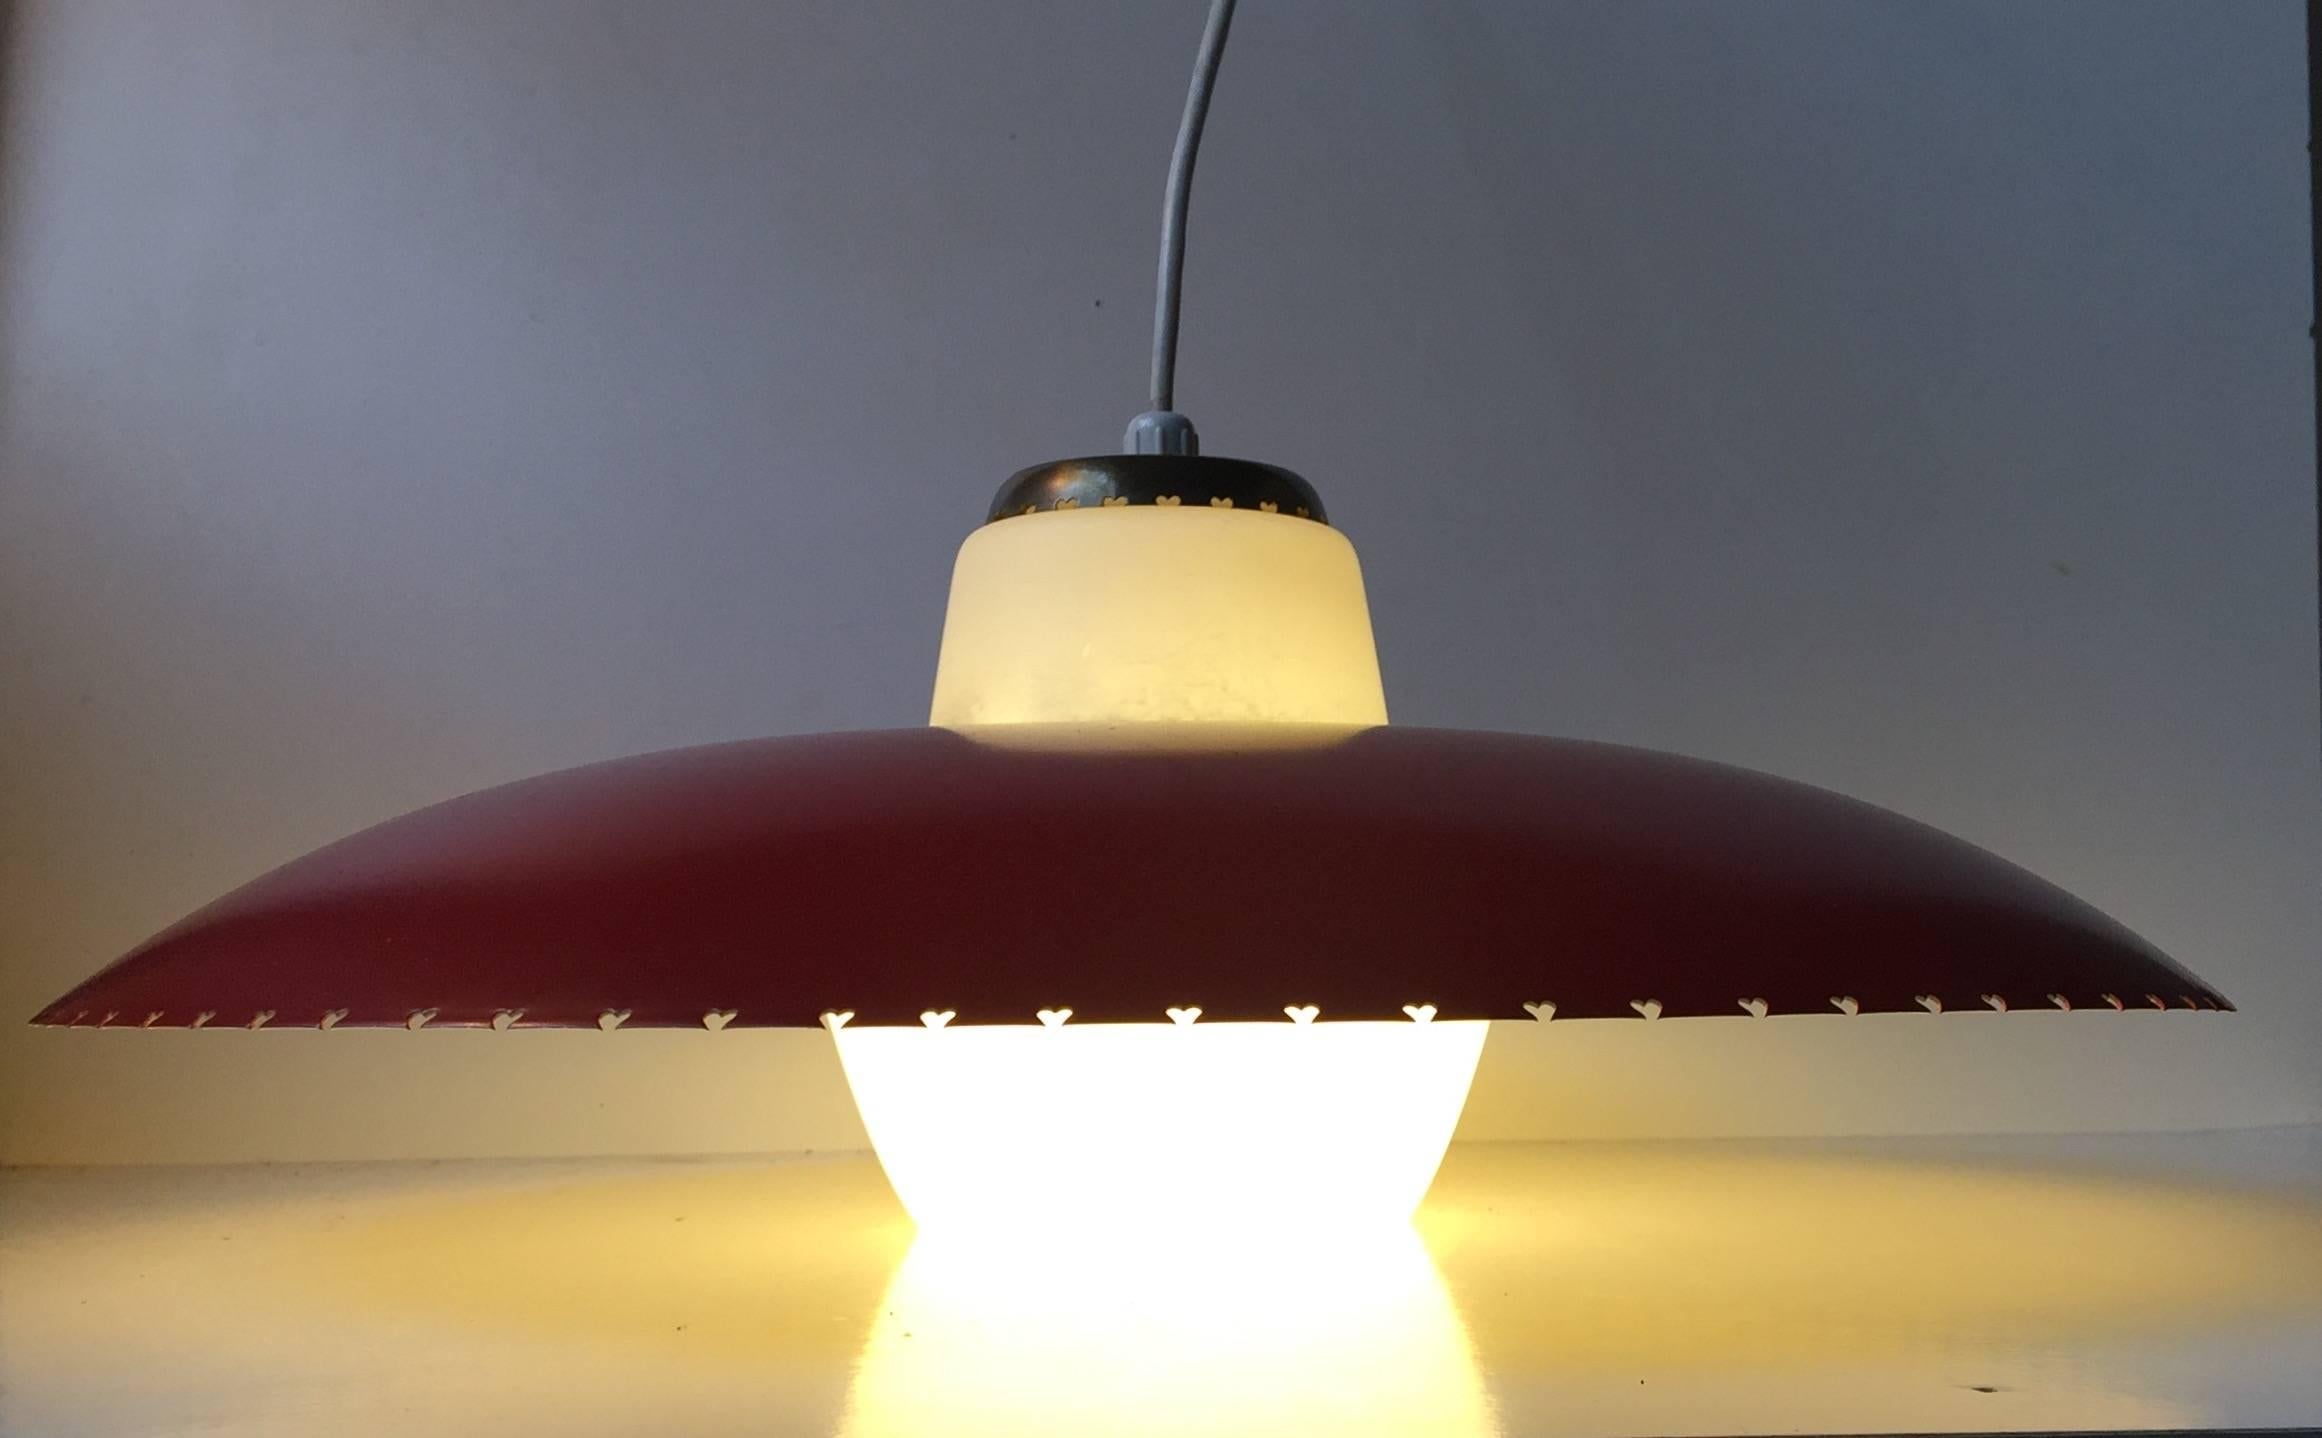 Danish ceiling light designed by Bent Karlby for Lyfa, Denmark and manufactured in the late 1950s. The light consists of a large red lacquered shade with perforated hearts to the edge, solid brass details and a bell clock shaped opaline glass center.